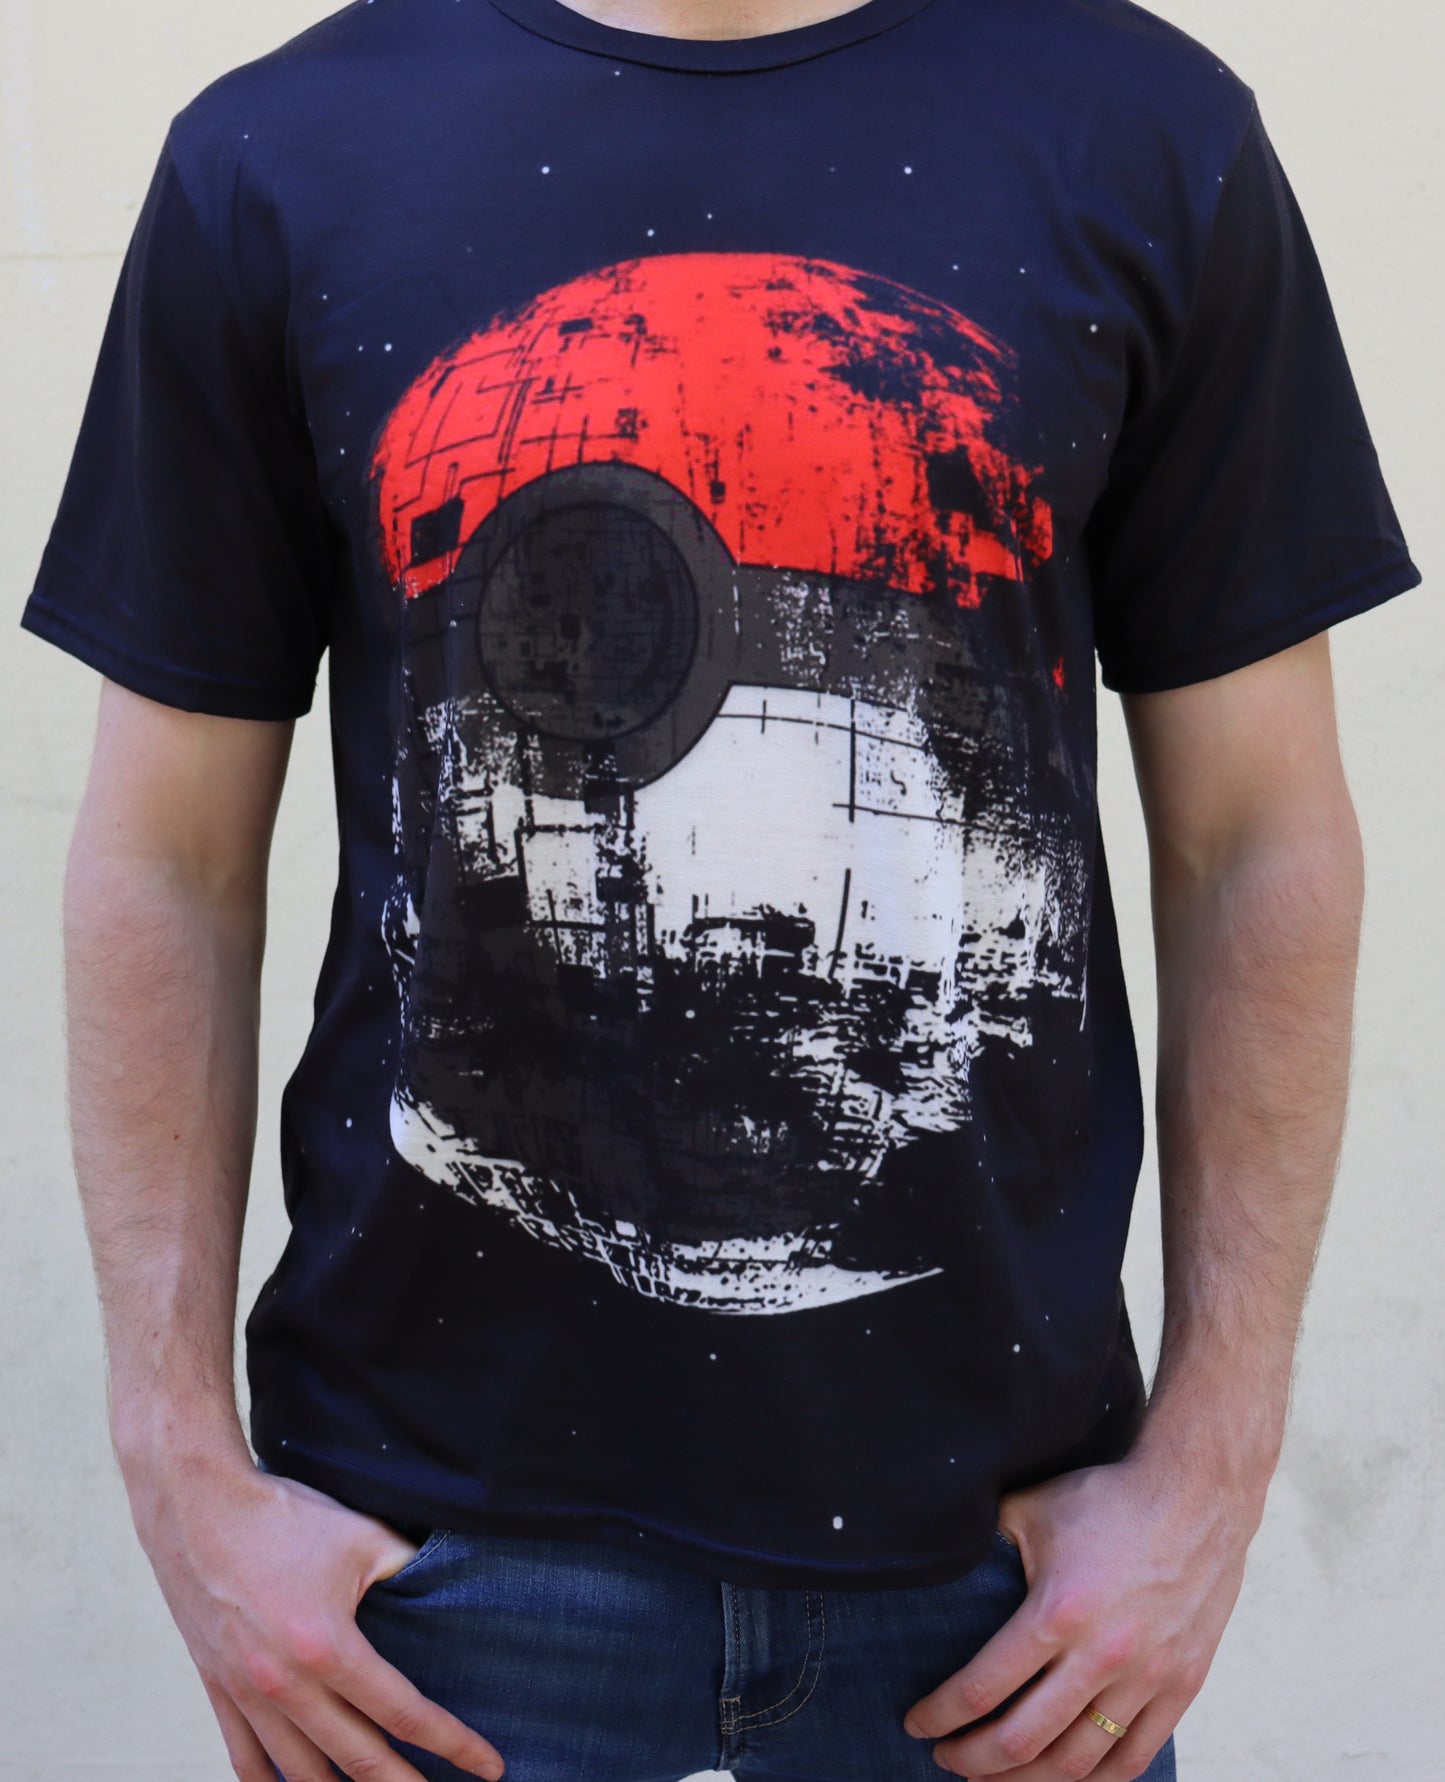 Pokemon - Death Star Pokeball TShirt (Price Does Not Include Shipping - Please Read Description)